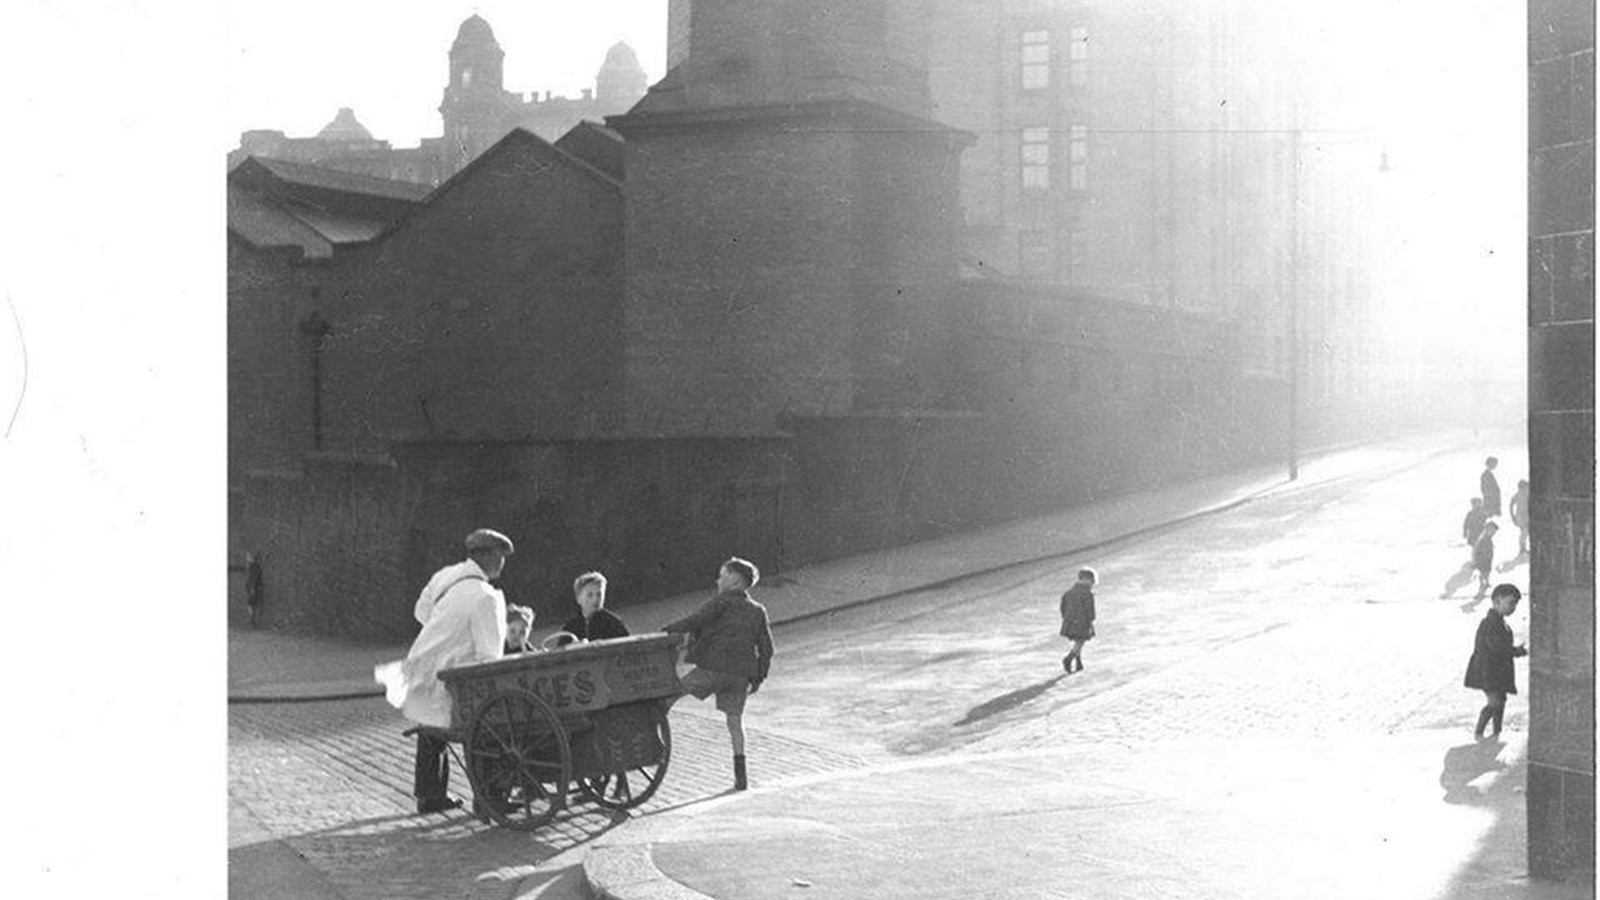 A black and white photograph of young kids playing on sunny cobbled street, some of which are chatting to an adult who is pulling along a small cart.